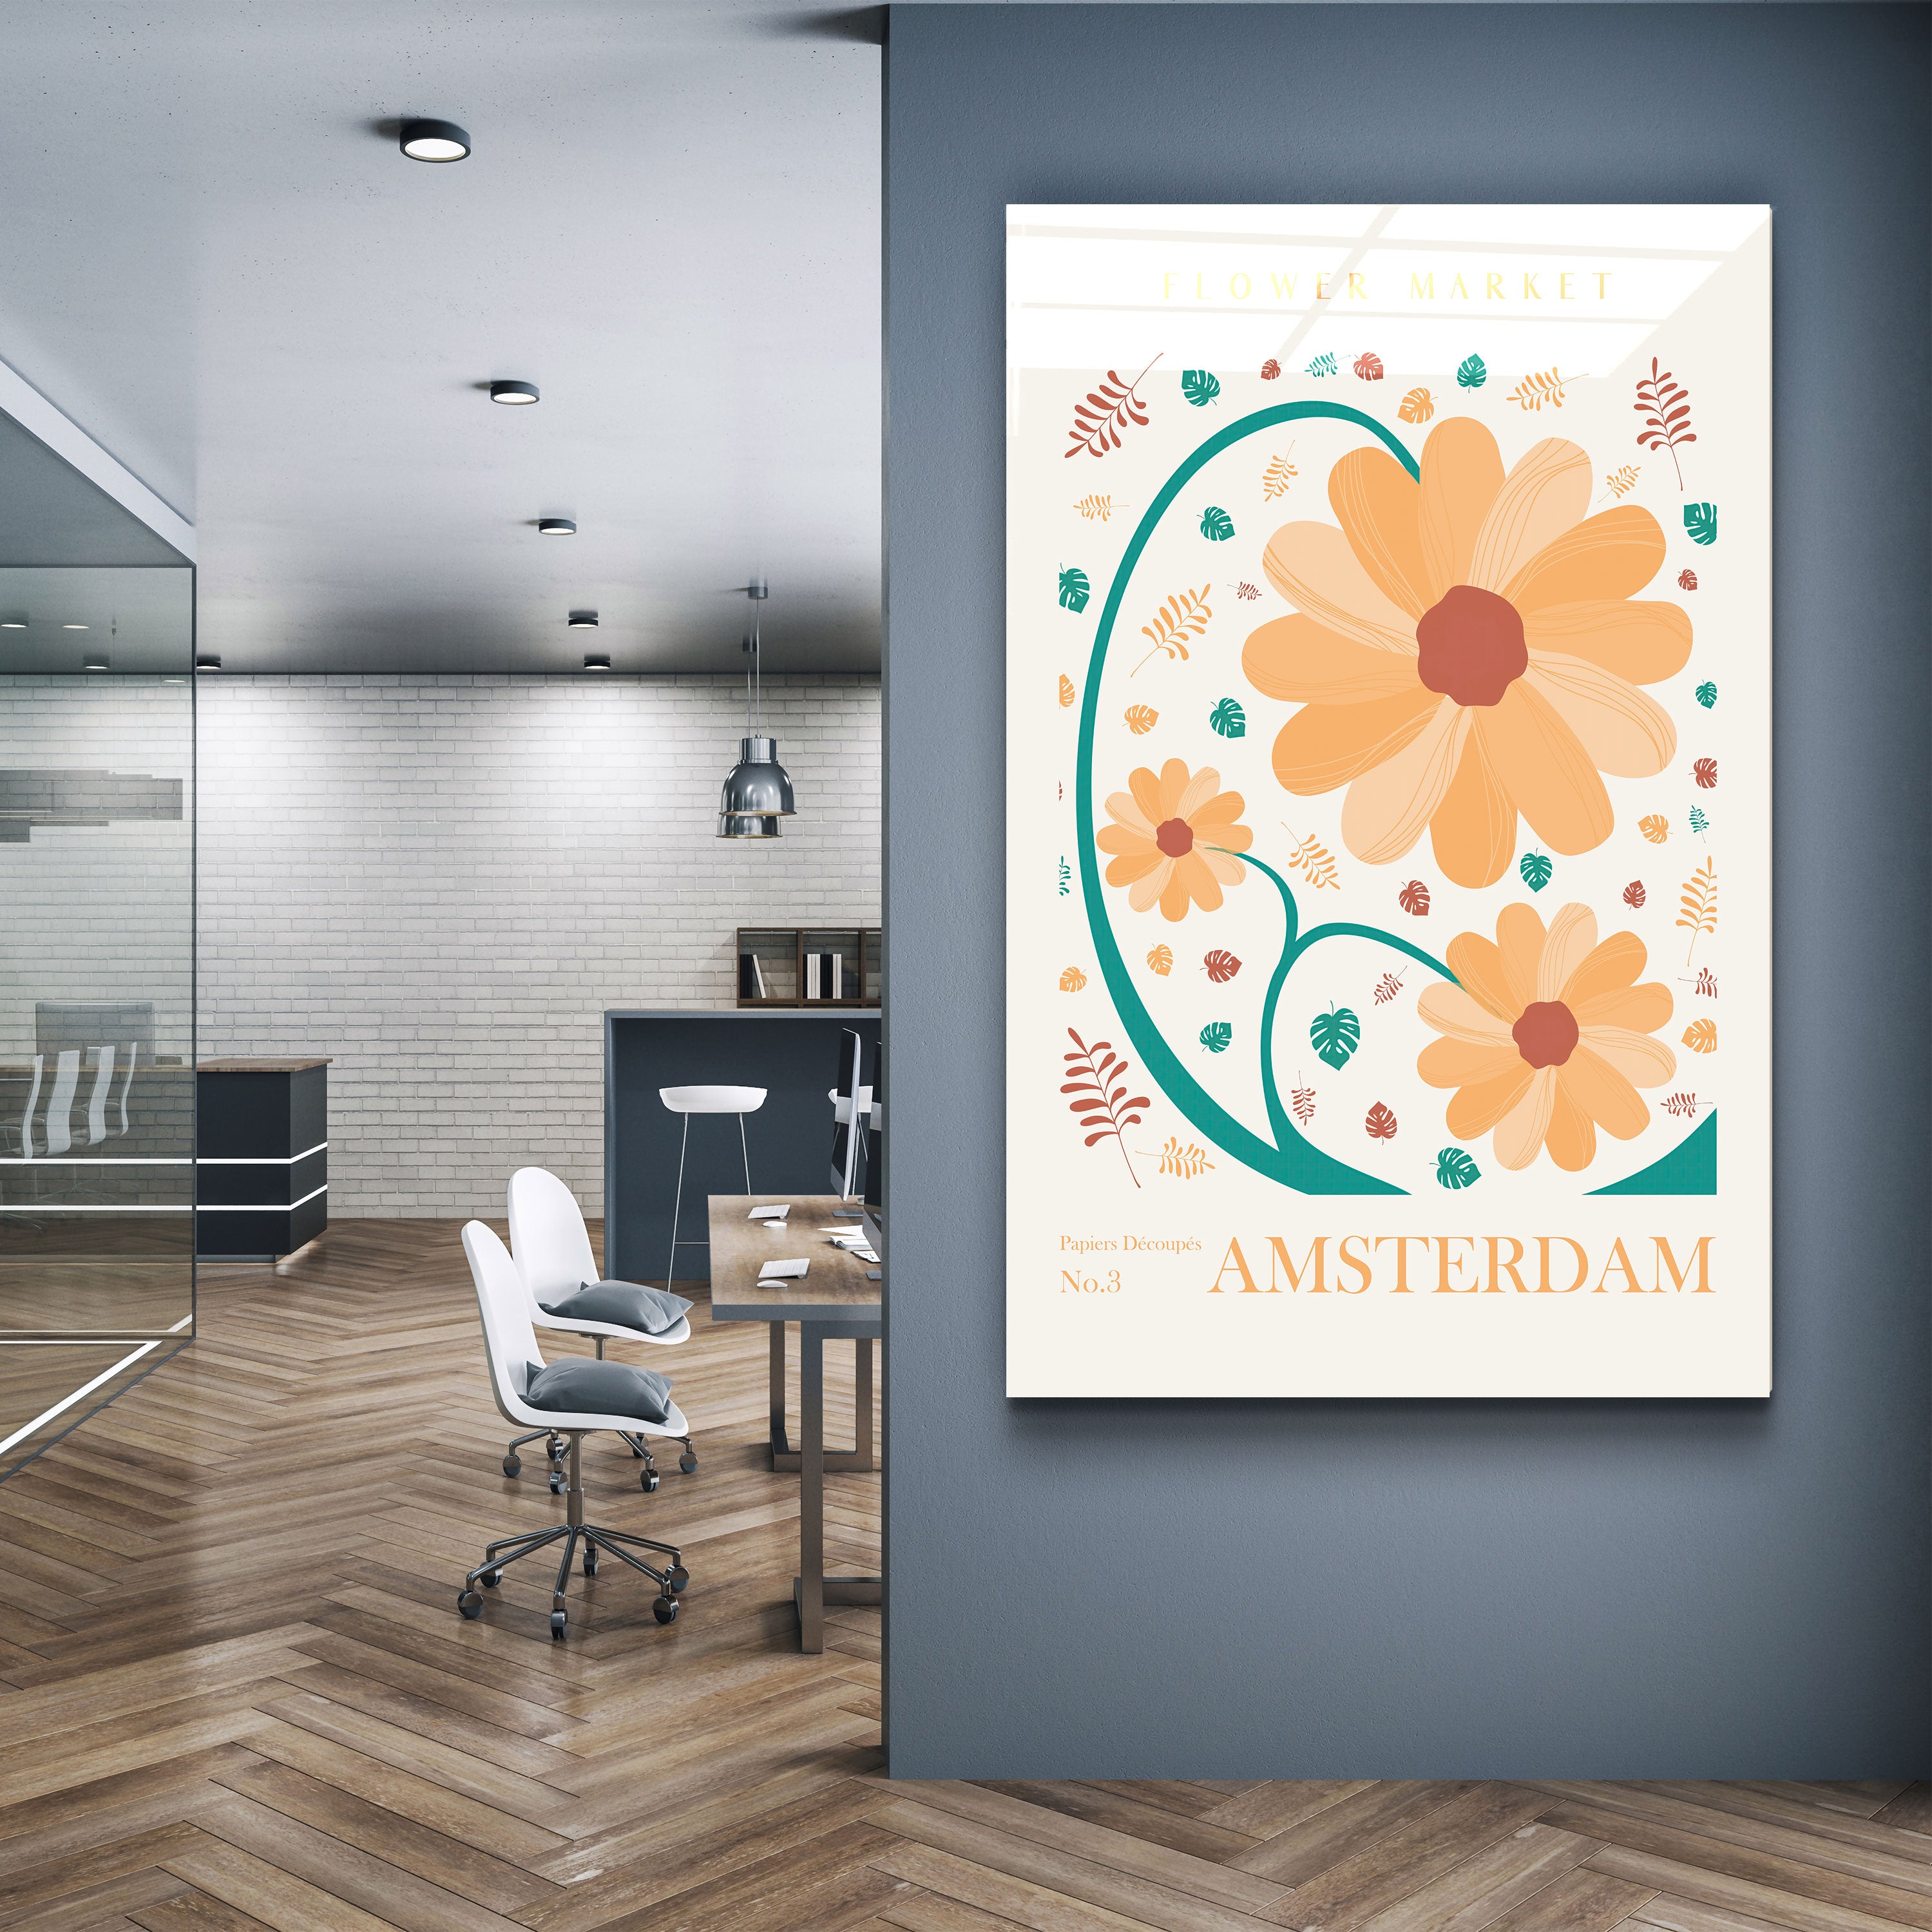 ・"Flower Market No:3 Amsterdam"・Gallery Print Collection Glass Wall Art